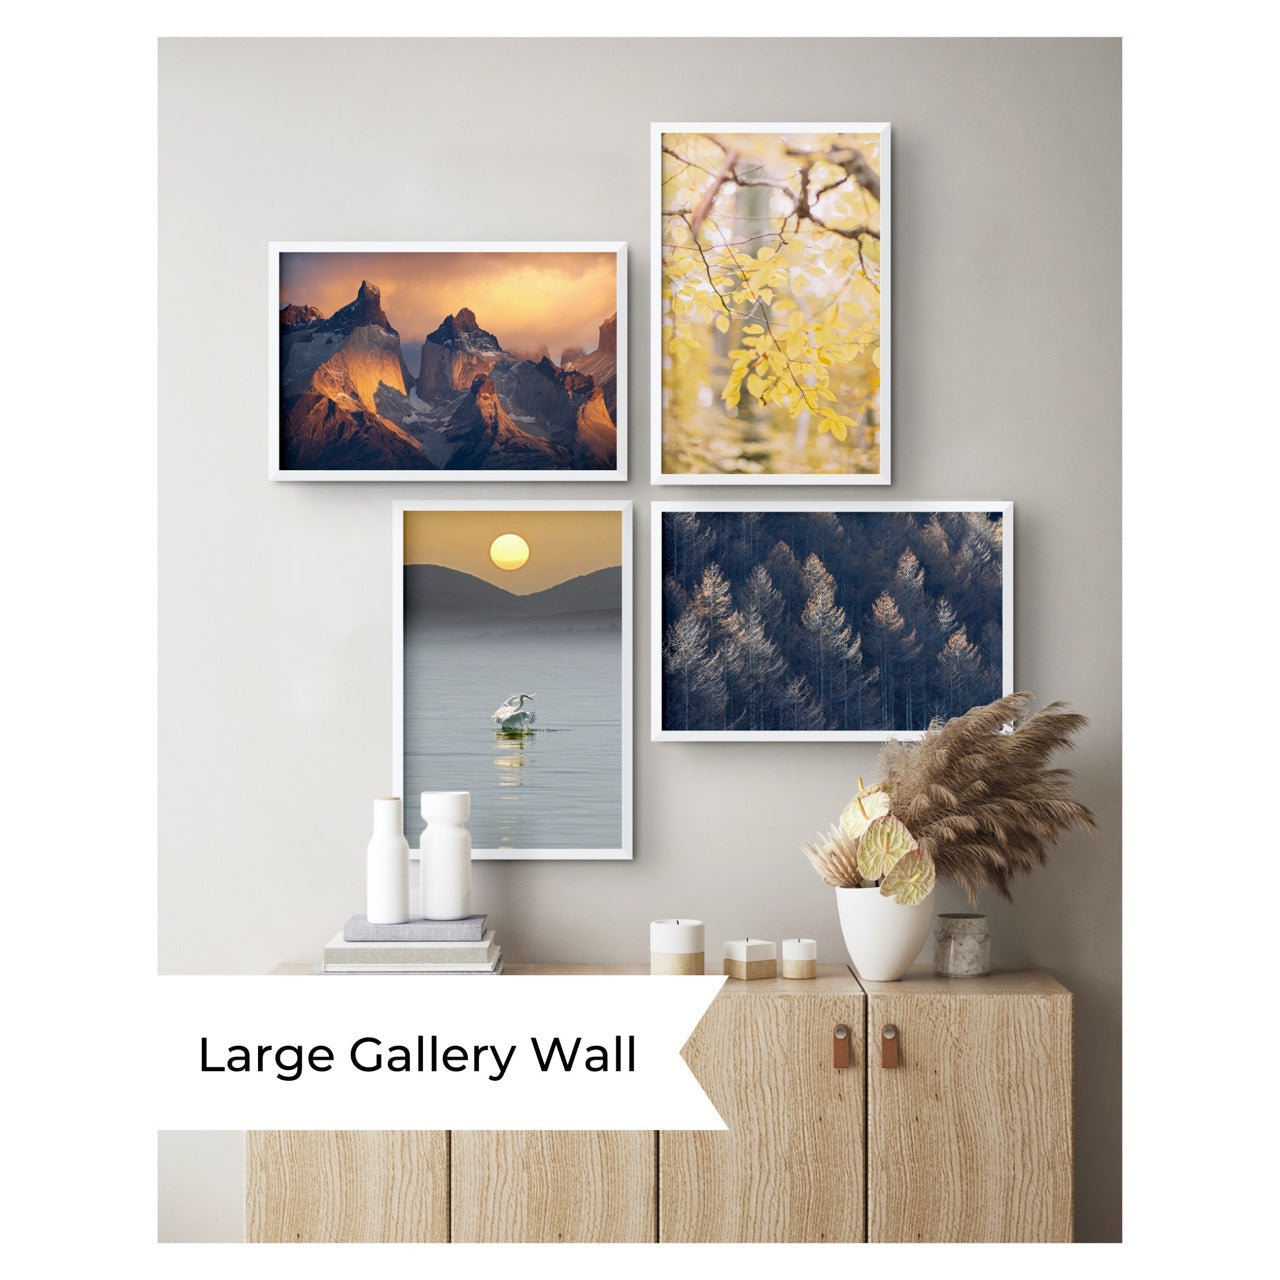 Gallery Wall Guide - MK Envision Galleries